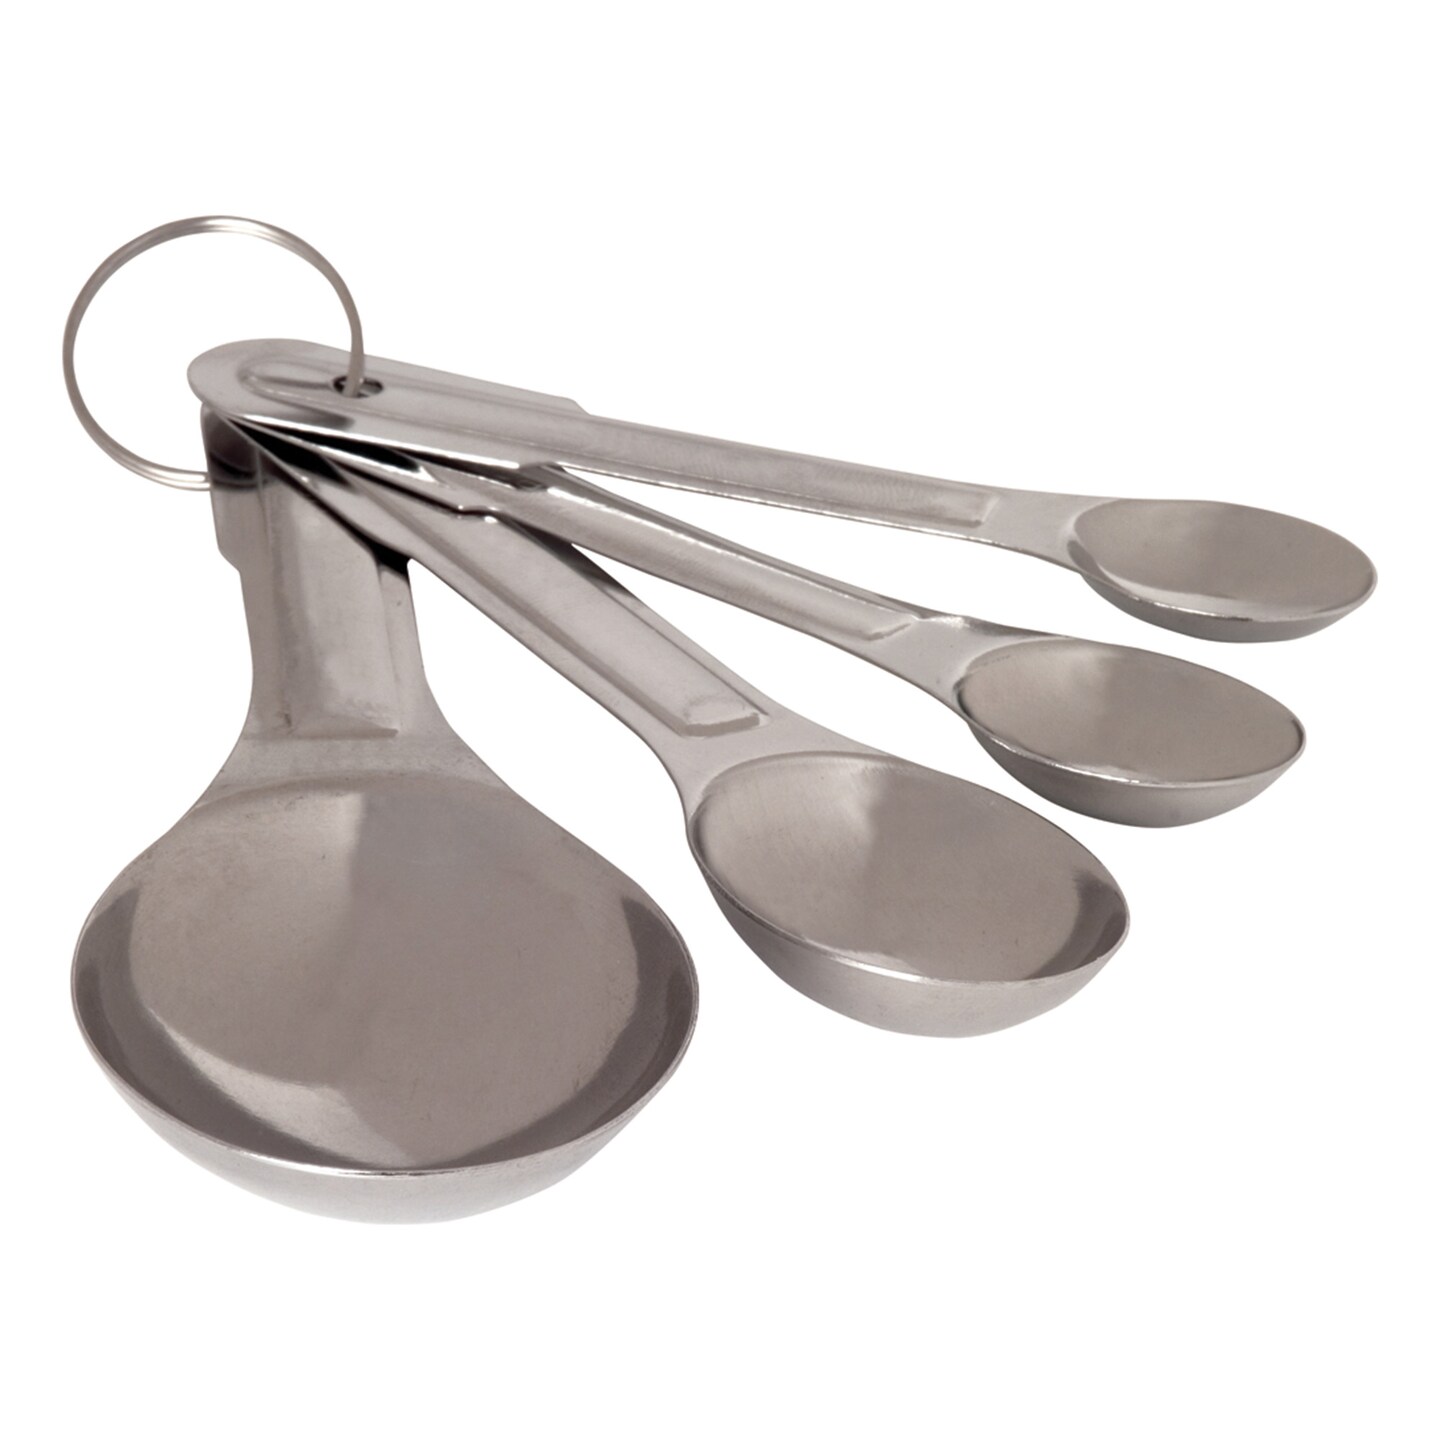 Silver Stainless Steel Measuring Spoons 24 per Box